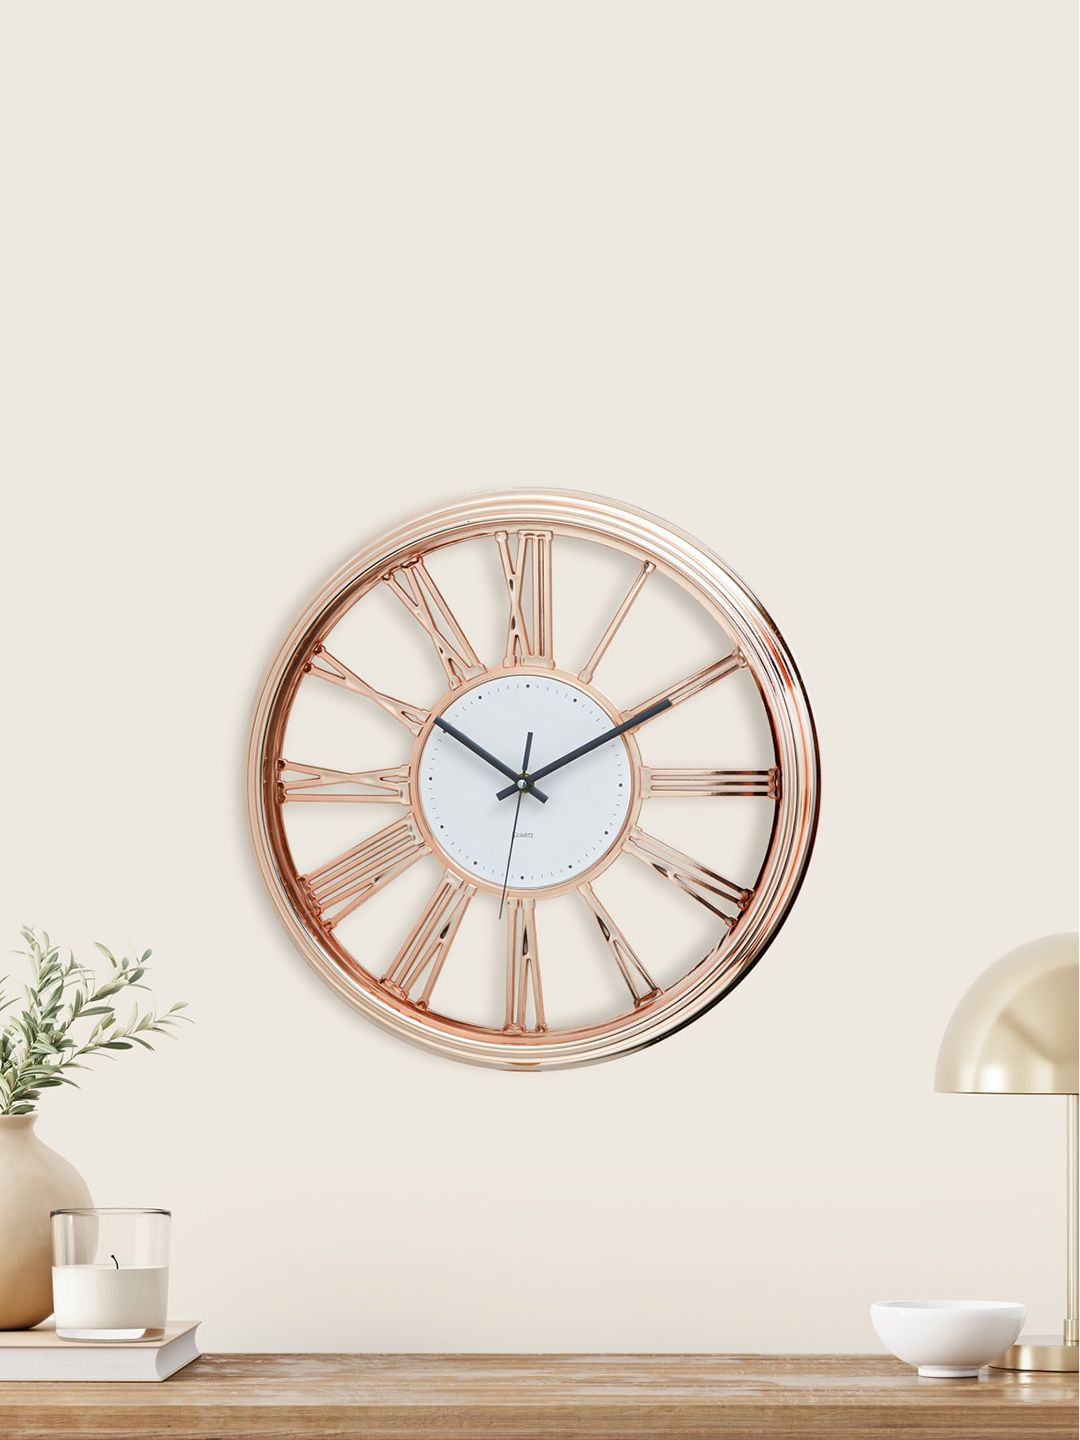 Home Centre Unisex Gold Analog Wall Clocks Price in India